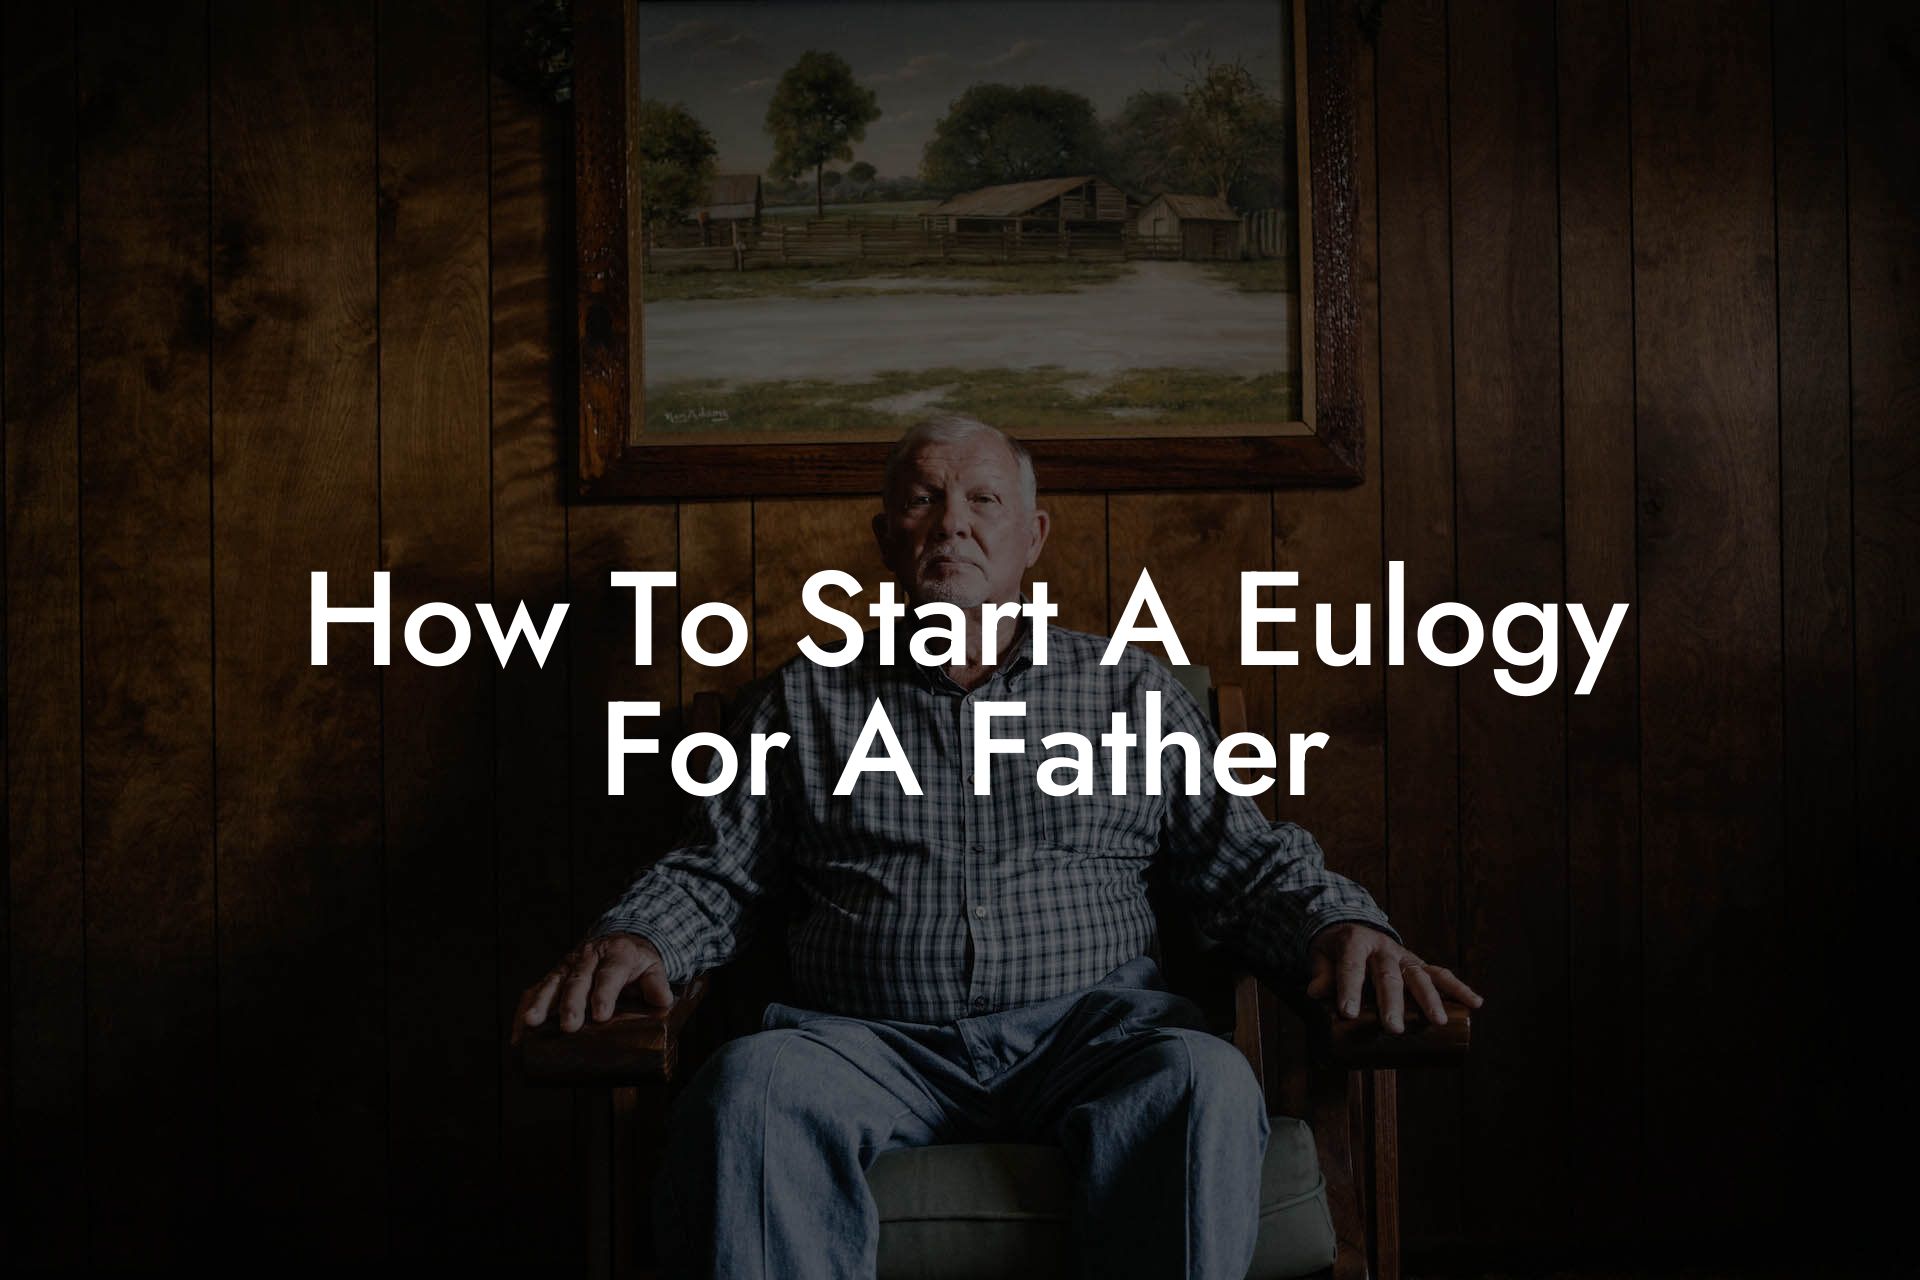 How To Start A Eulogy For A Father?